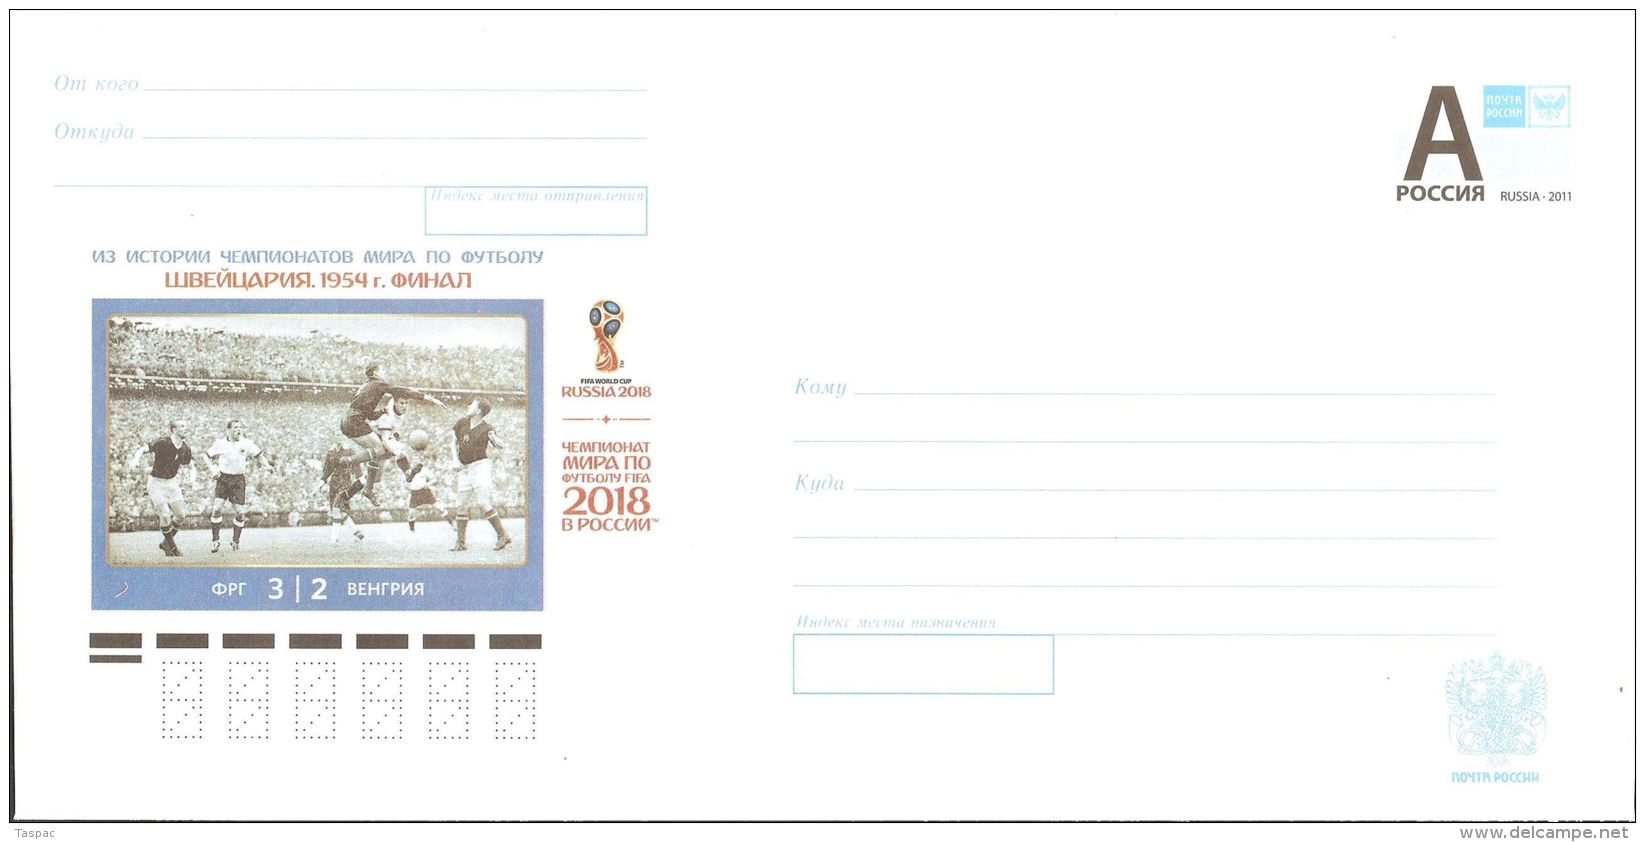 Russia 2015 # 147 Postal Stationery Cover Unused - History Of World Cup Soccer Championship, Switzerland 1954 - 1954 – Switzerland